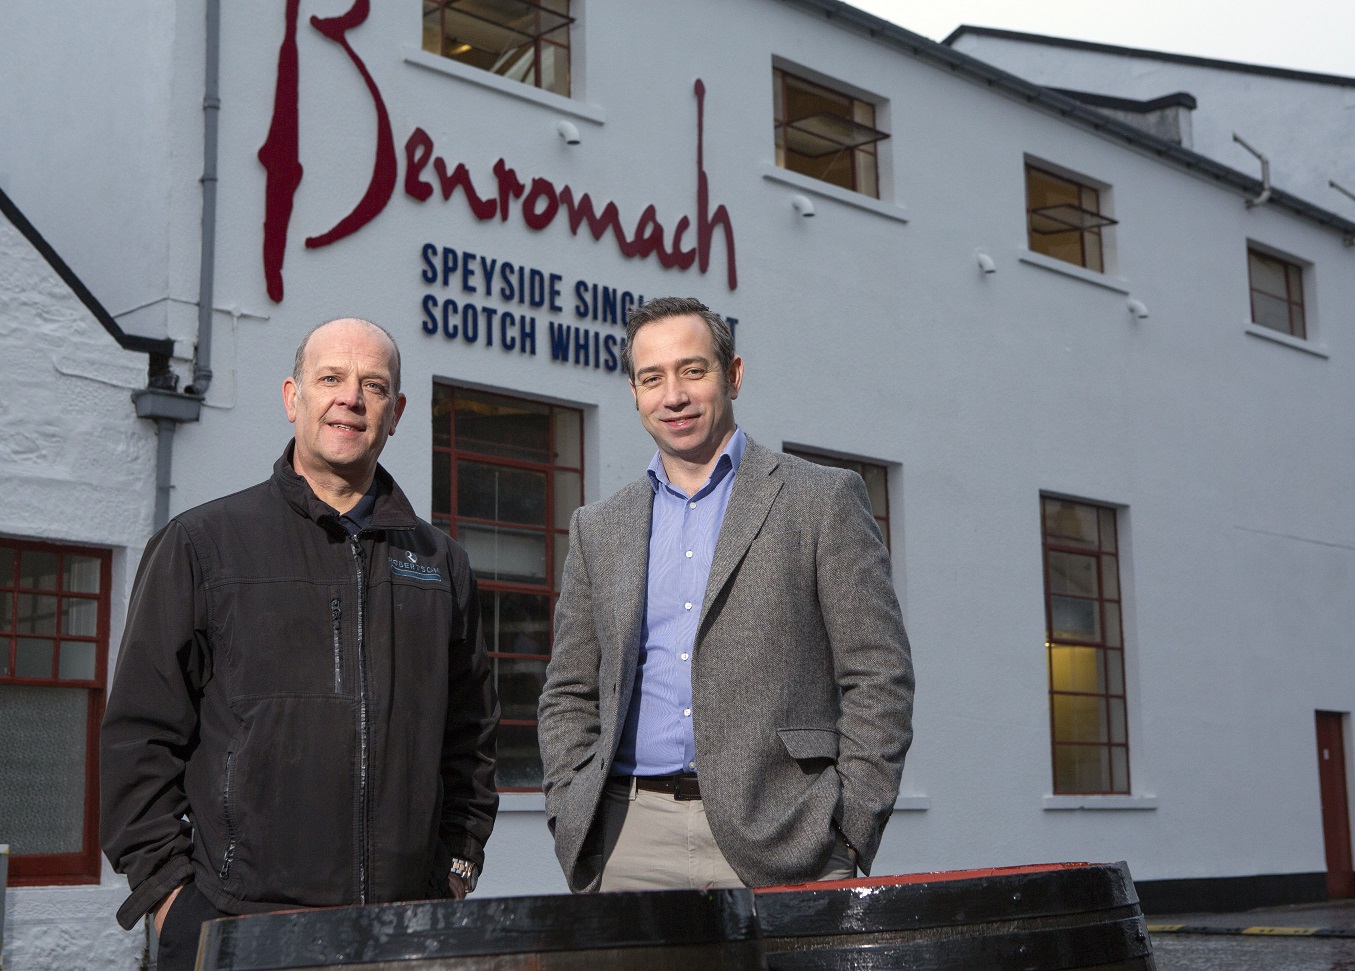 Robertson to deliver two new warehouses at Benromach Distillery